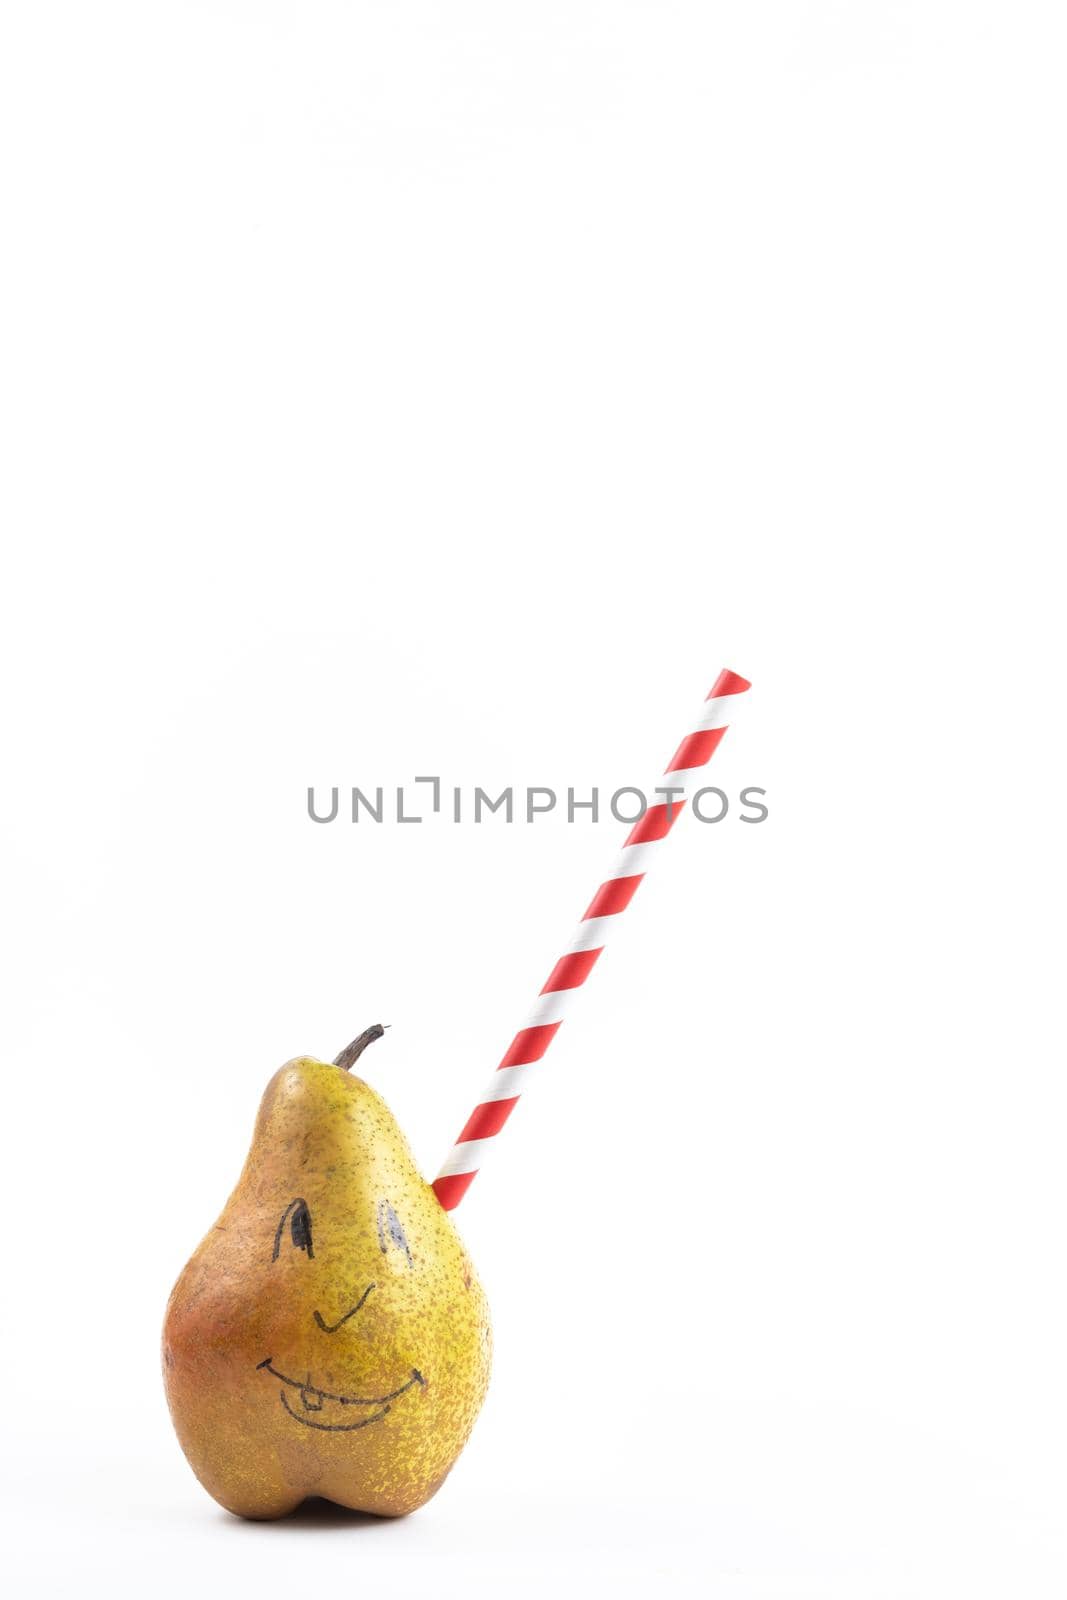 A large pear with a drinking tube sticking out of it on a white background by Lobachad